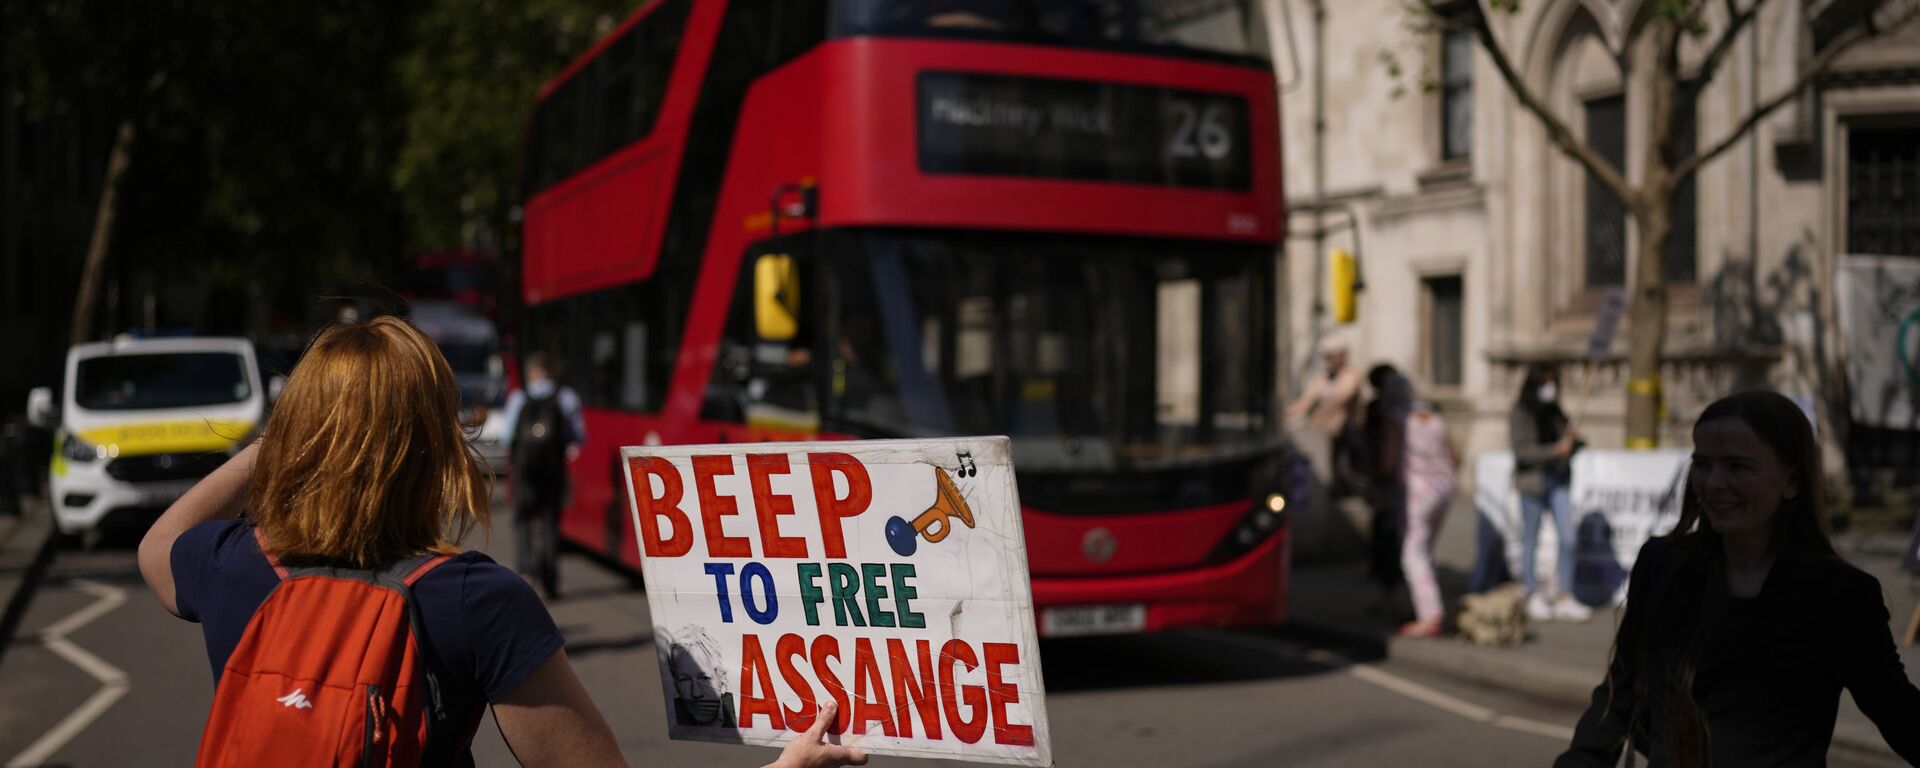 A supporter of WikiLeaks founder Julian Assange holds a placard as they protest, during the first hearing in the Julian Assange extradition appeal, at the High Court in London, Wednesday, Aug. 11, 2021. - Sputnik International, 1920, 23.10.2021